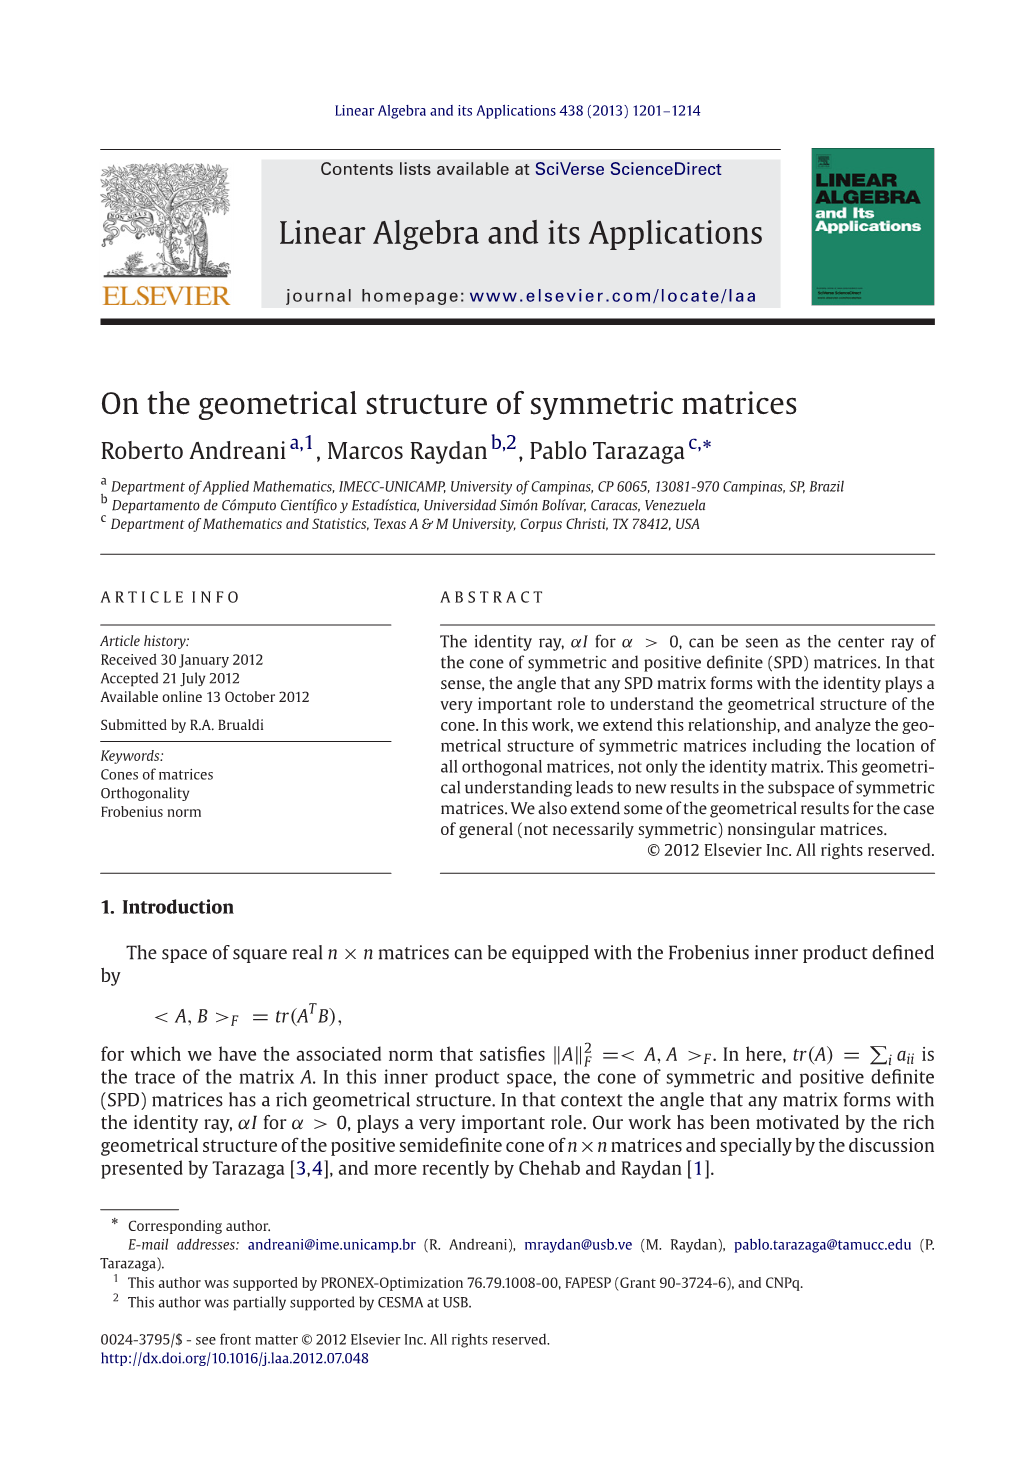 On the Geometrical Structure of Symmetric Matrices